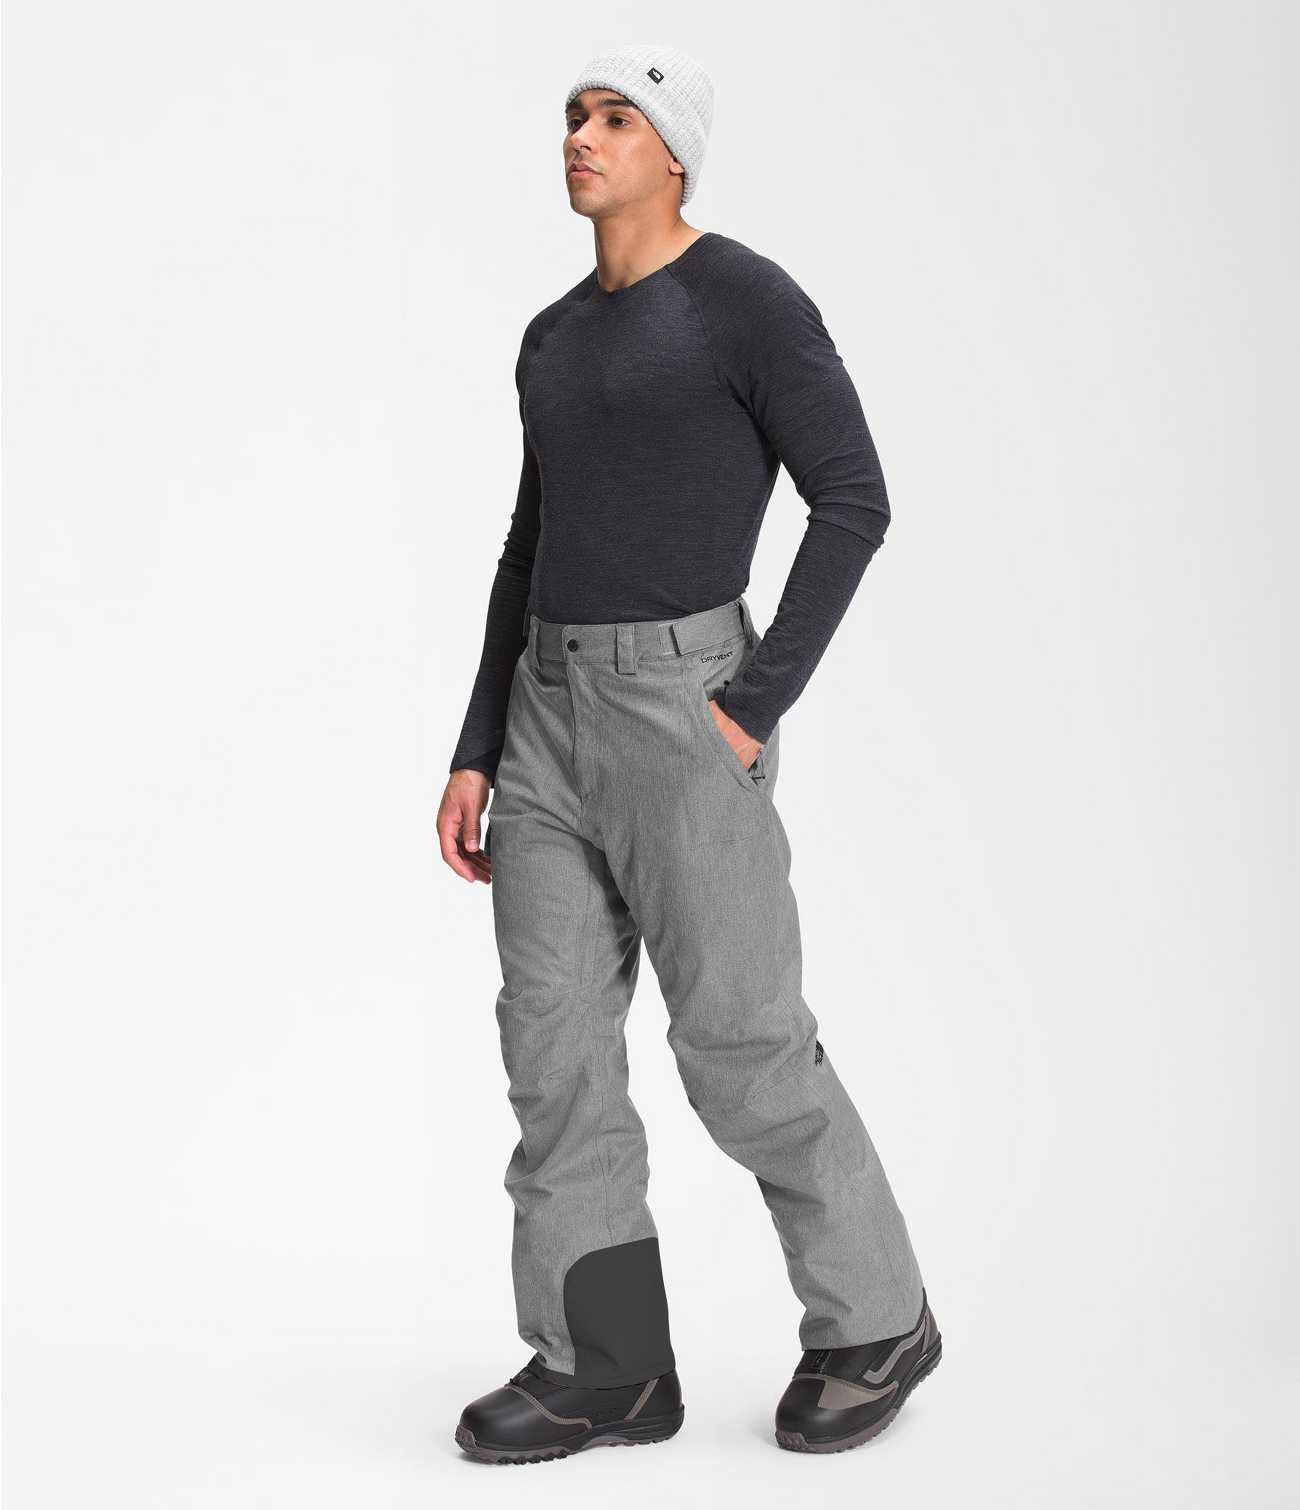 MEN'S FREEDOM INSULATED PANT, The North Face